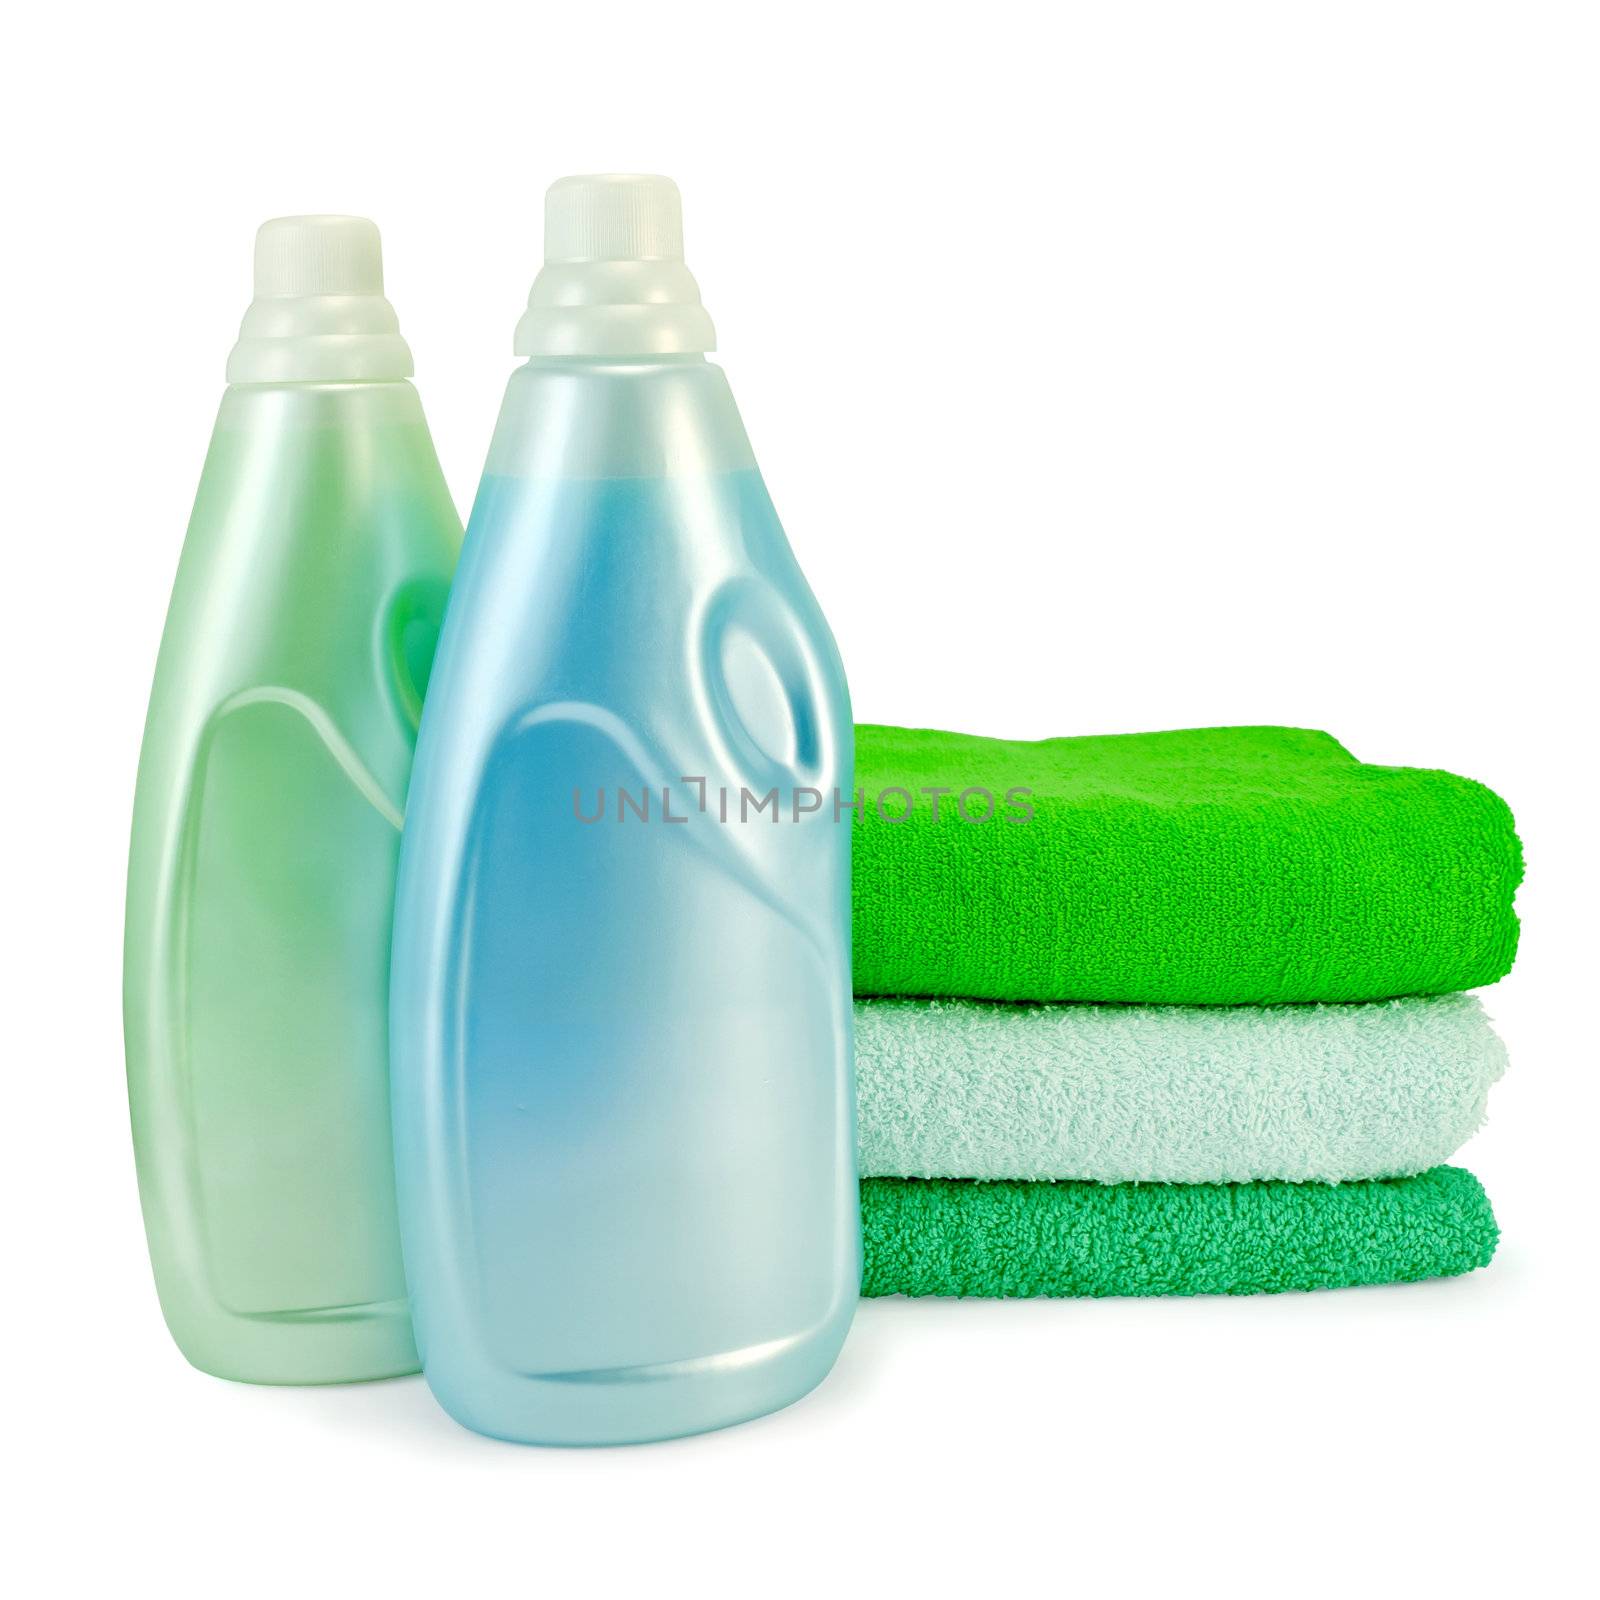 Two bottles of fabric softener blue and green colors, a stack of three towel isolated on white background